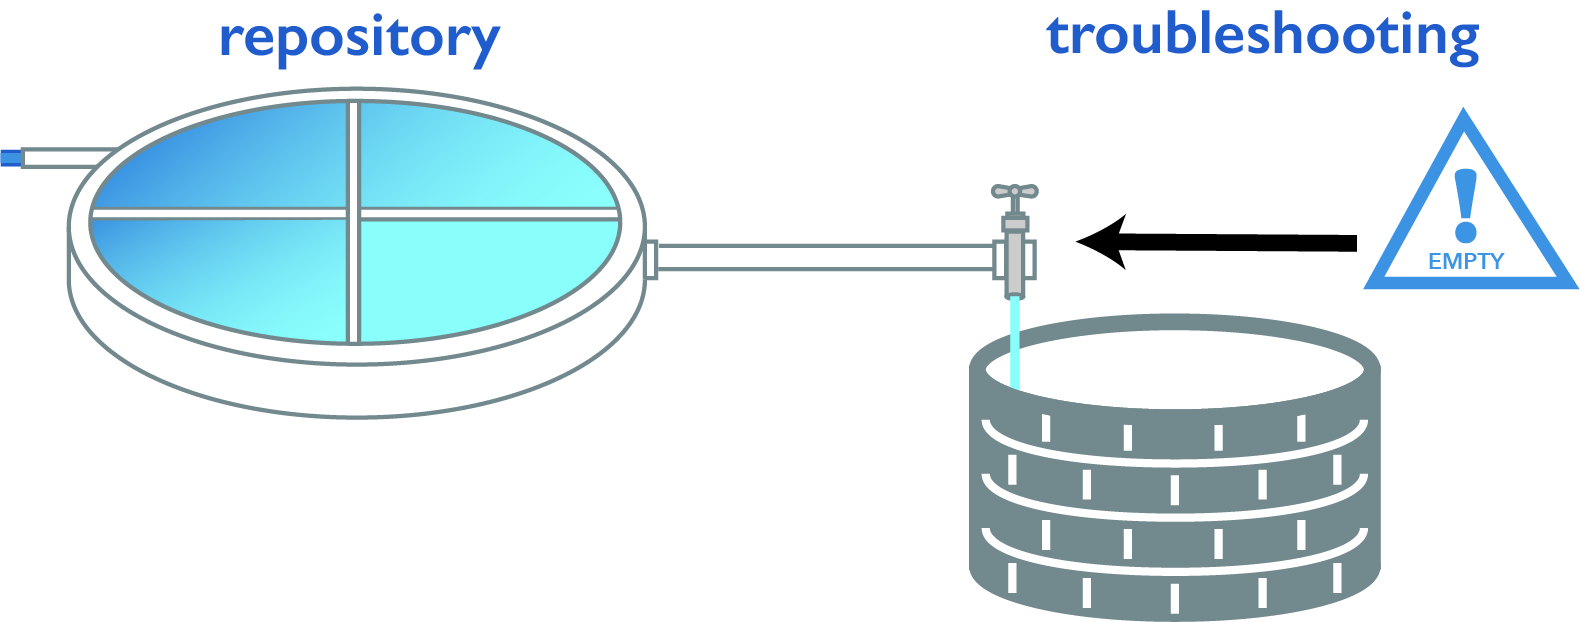 A graphic showing an empty pool being filled with water from a tap. The tap represents the repository and the empty pool represents troubleshooting.